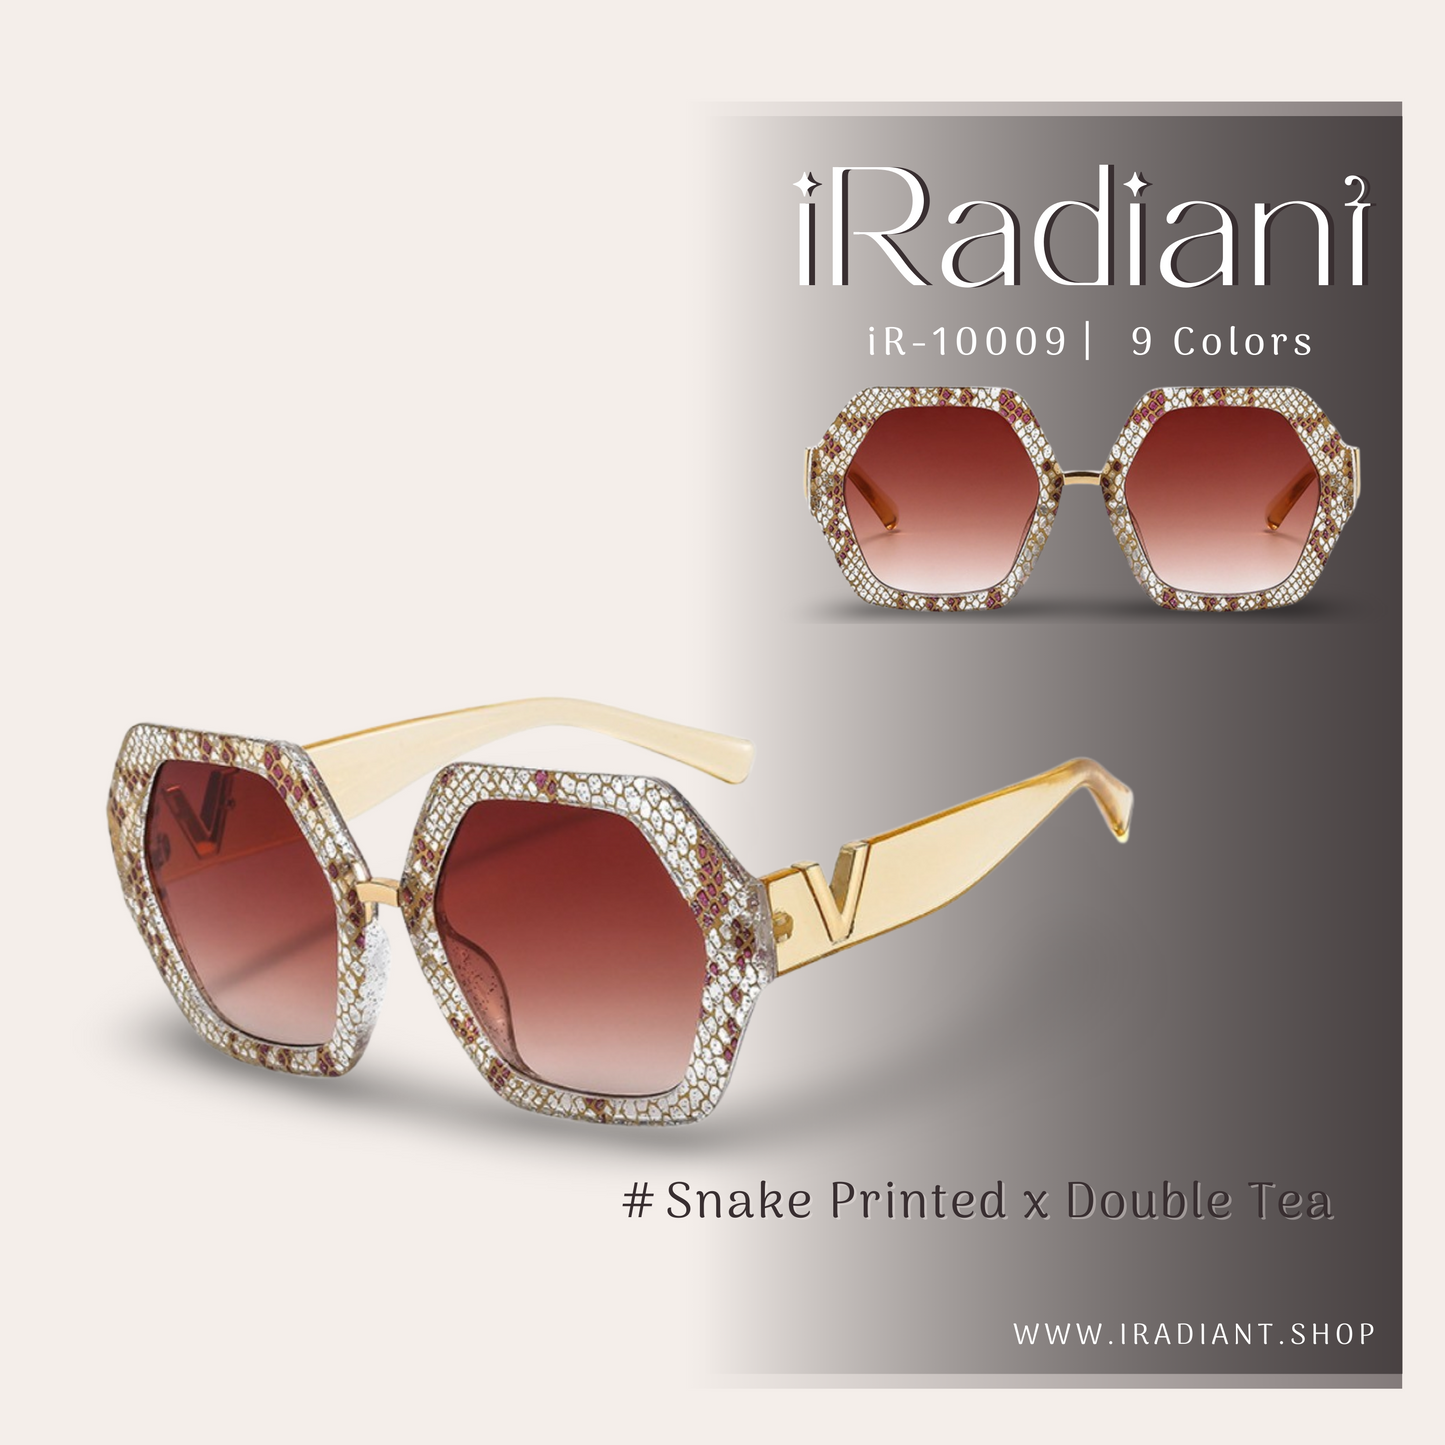 iR-10009-E ︳iRadiant Hexagonal Thick Frame Shades ︳For Women's ︳ Snake Printed x Double Tea